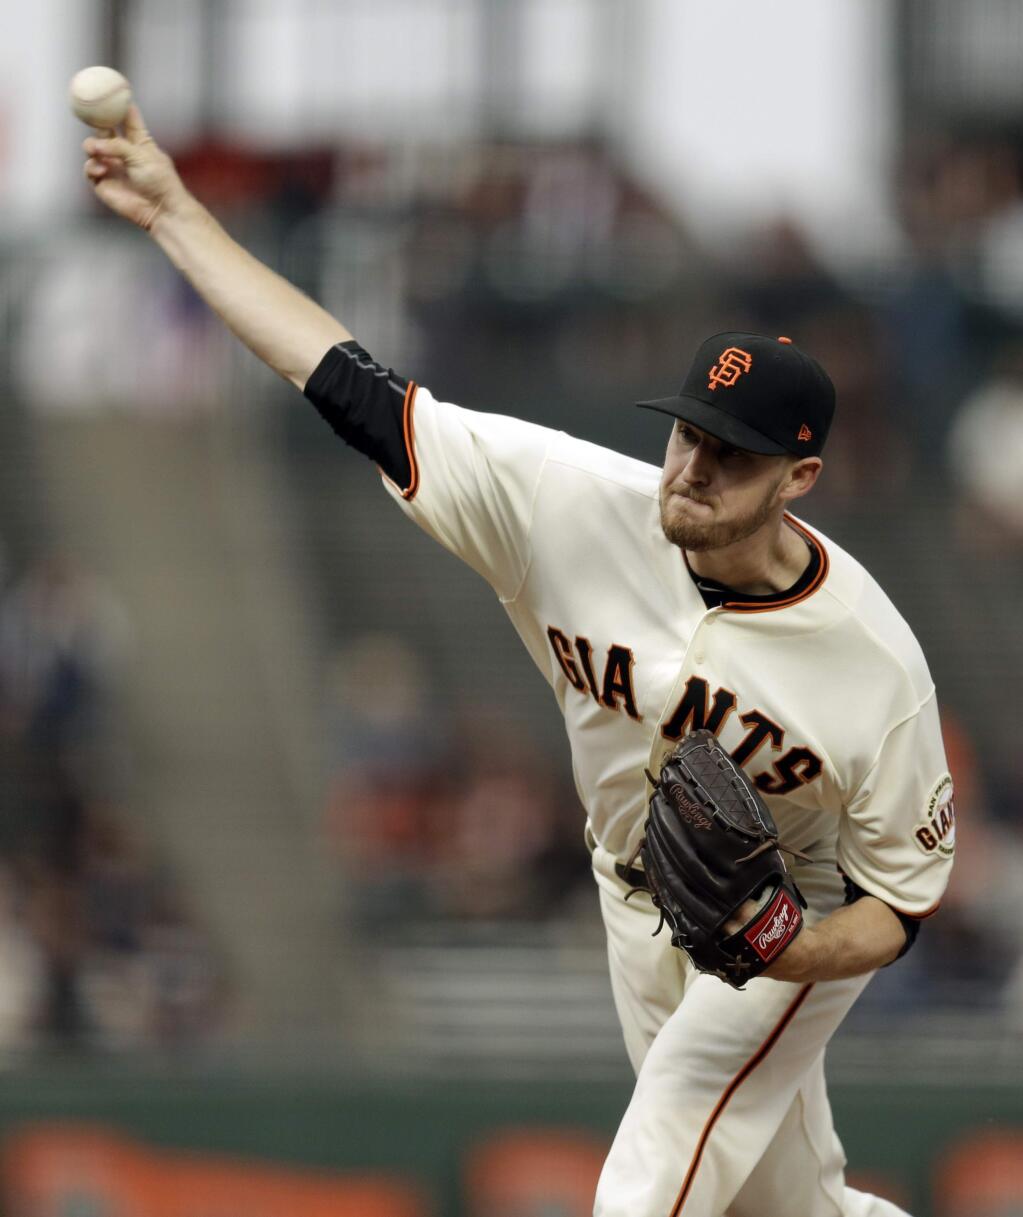 San Francisco Giants pitcher Chris Stratton works against the Milwaukee Brewers in the first inning of a baseball game Monday, Aug. 21, 2017, in San Francisco. (AP Photo/Ben Margot)